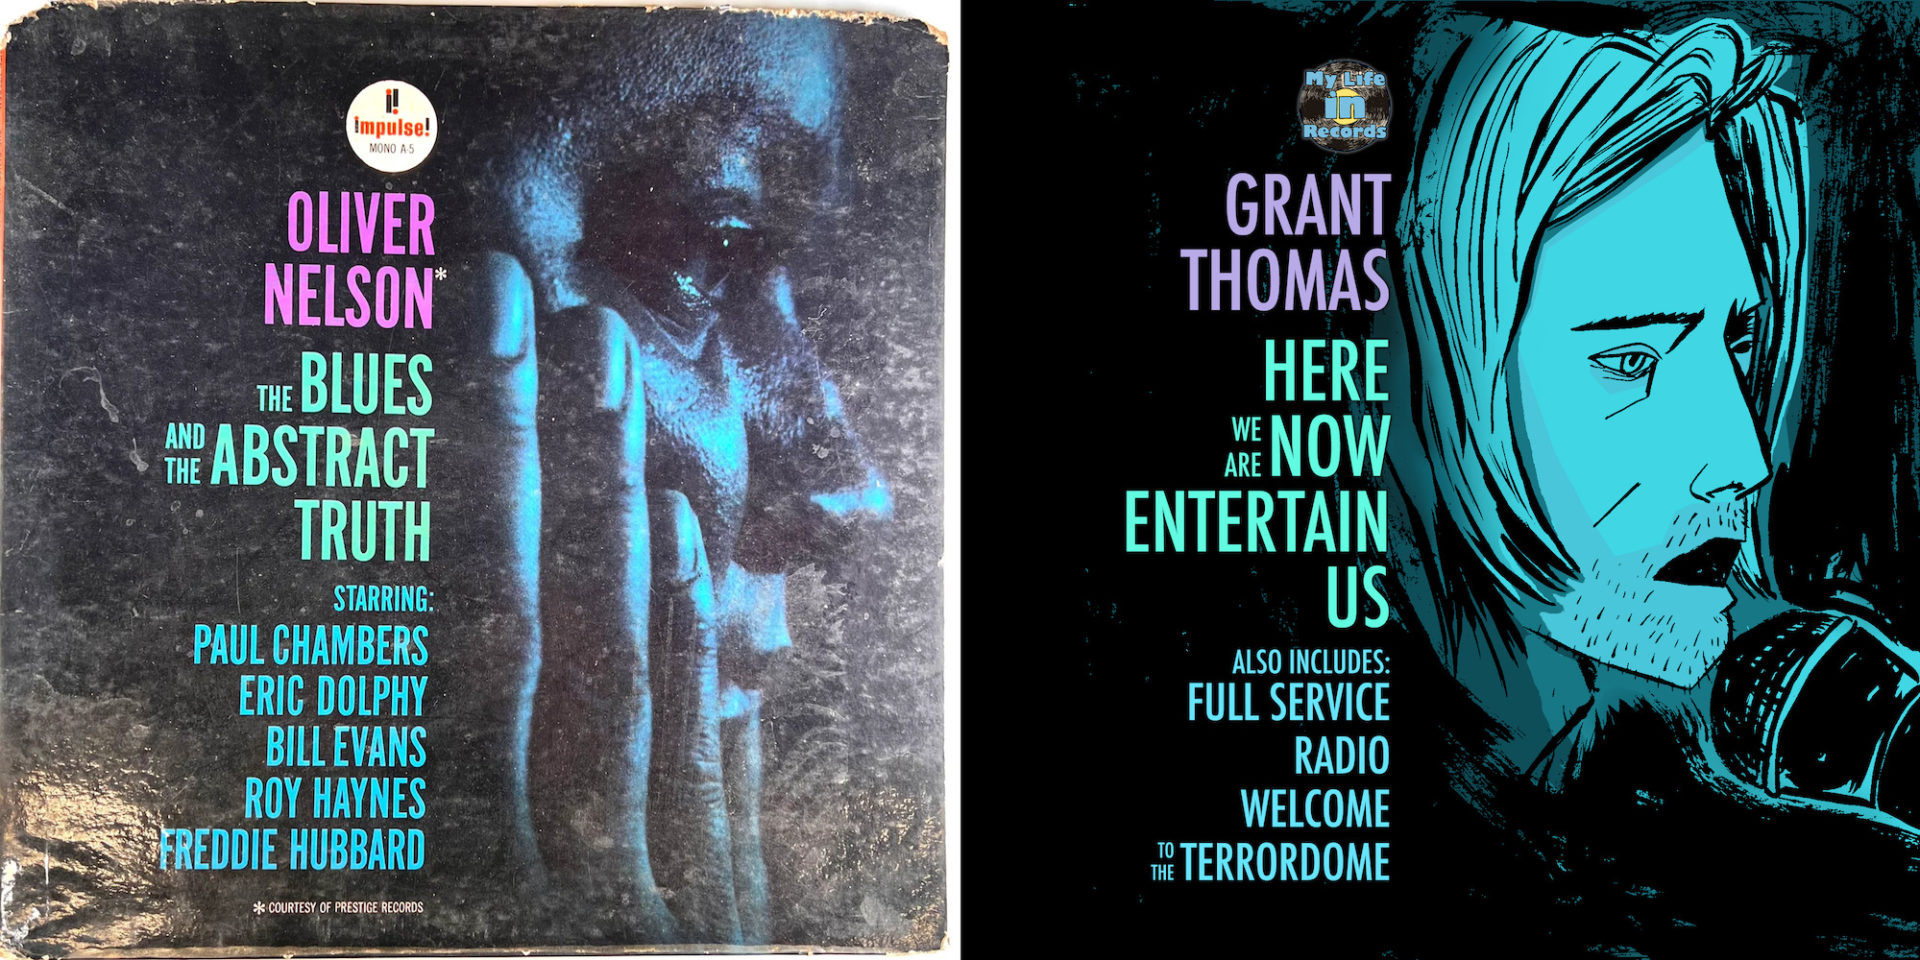 A two picture collage. On the left is the cover of Oliver Nelson's "Blues and the abstract truth" album. On the right is Thomas' issue number 6, clearly inspired by the Nelson album. It features the same multi-colored fonts on the left with a profile of a man on the right. 